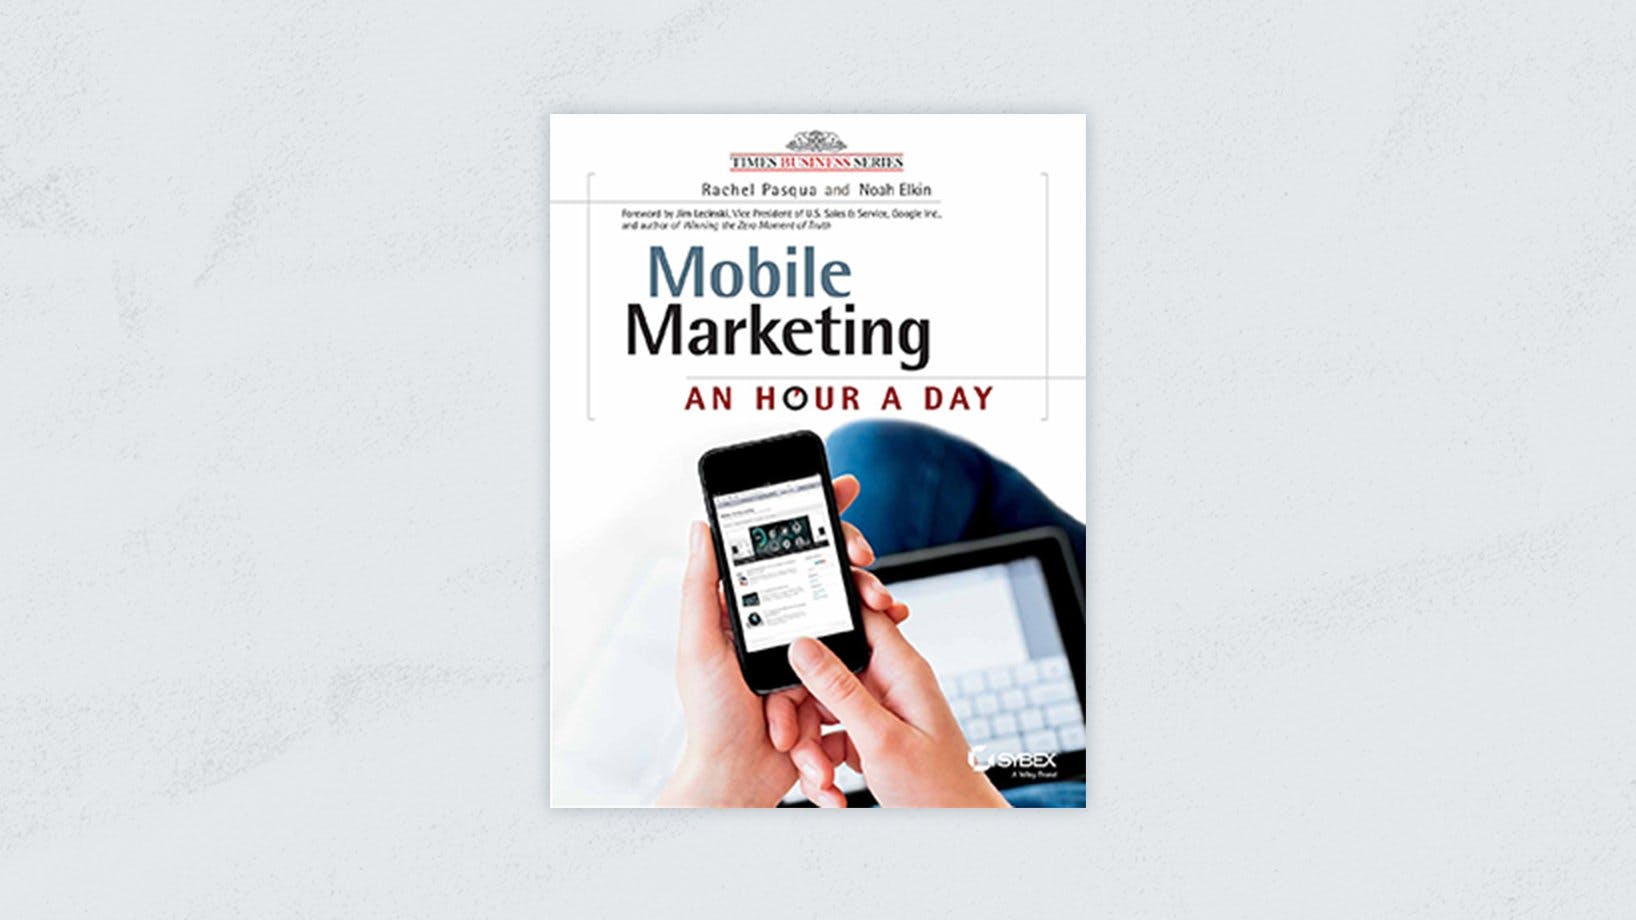 Mobile Marketing: An Hour a Day 